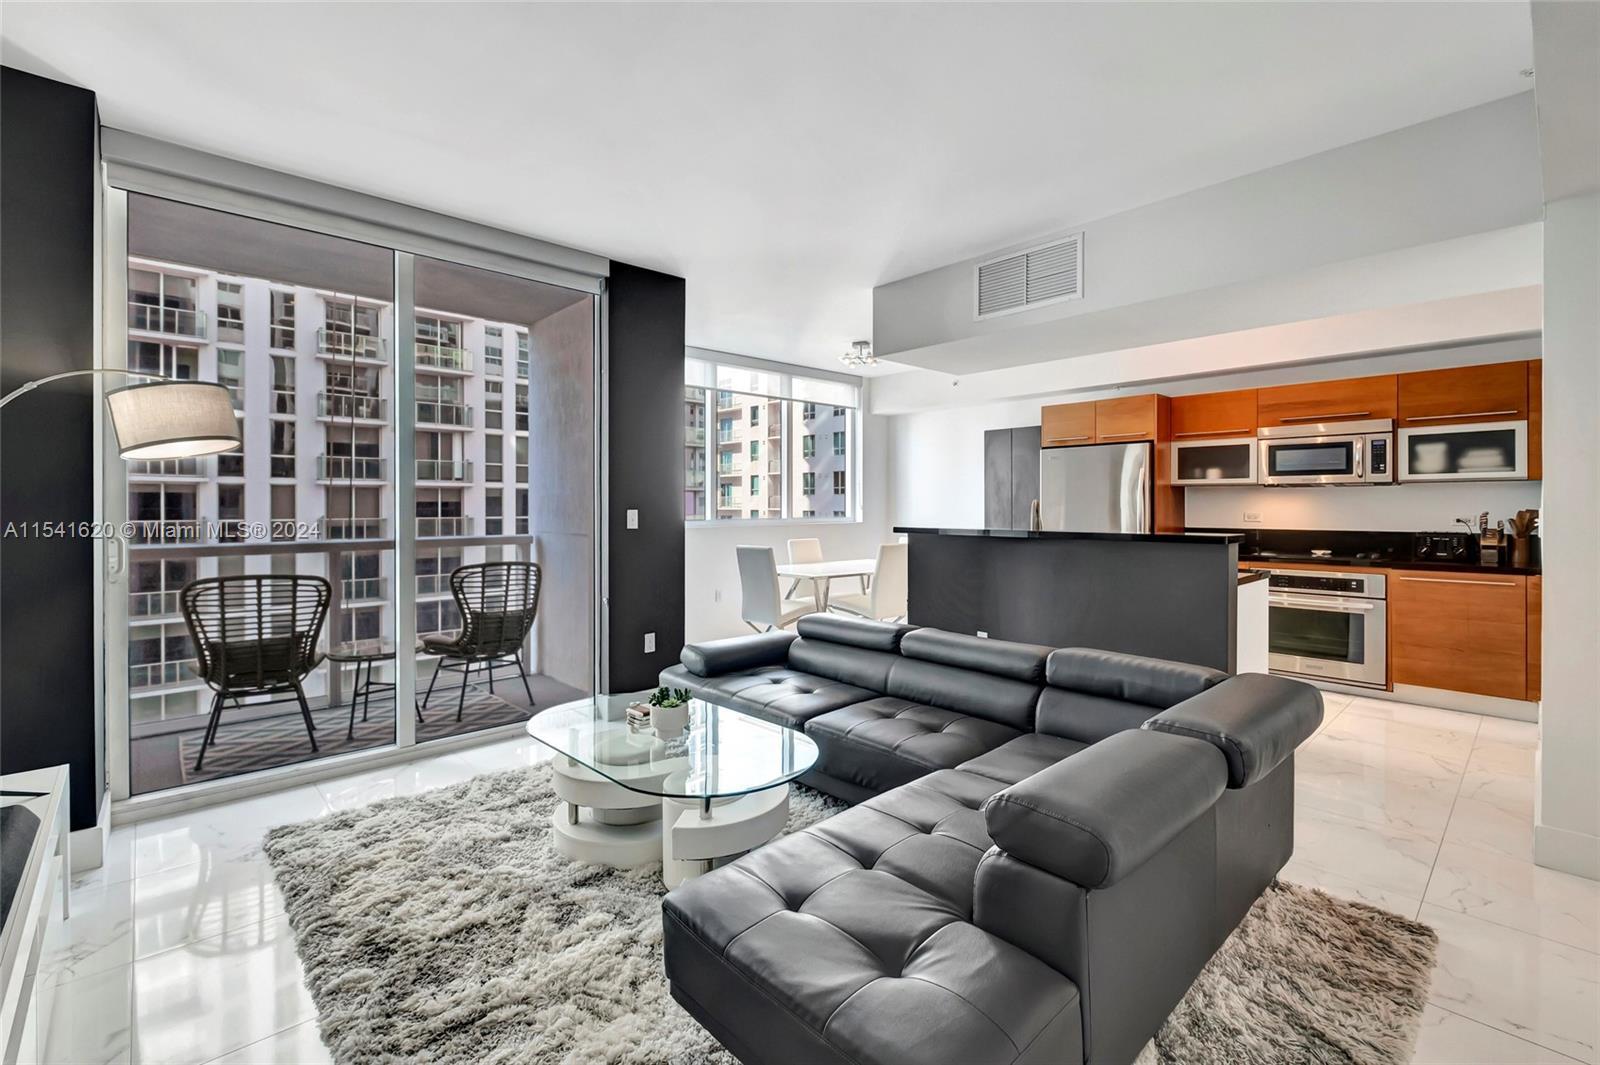 Welcome to one of the most unique floor plans in all of Downtown Miami . It features one large bedro